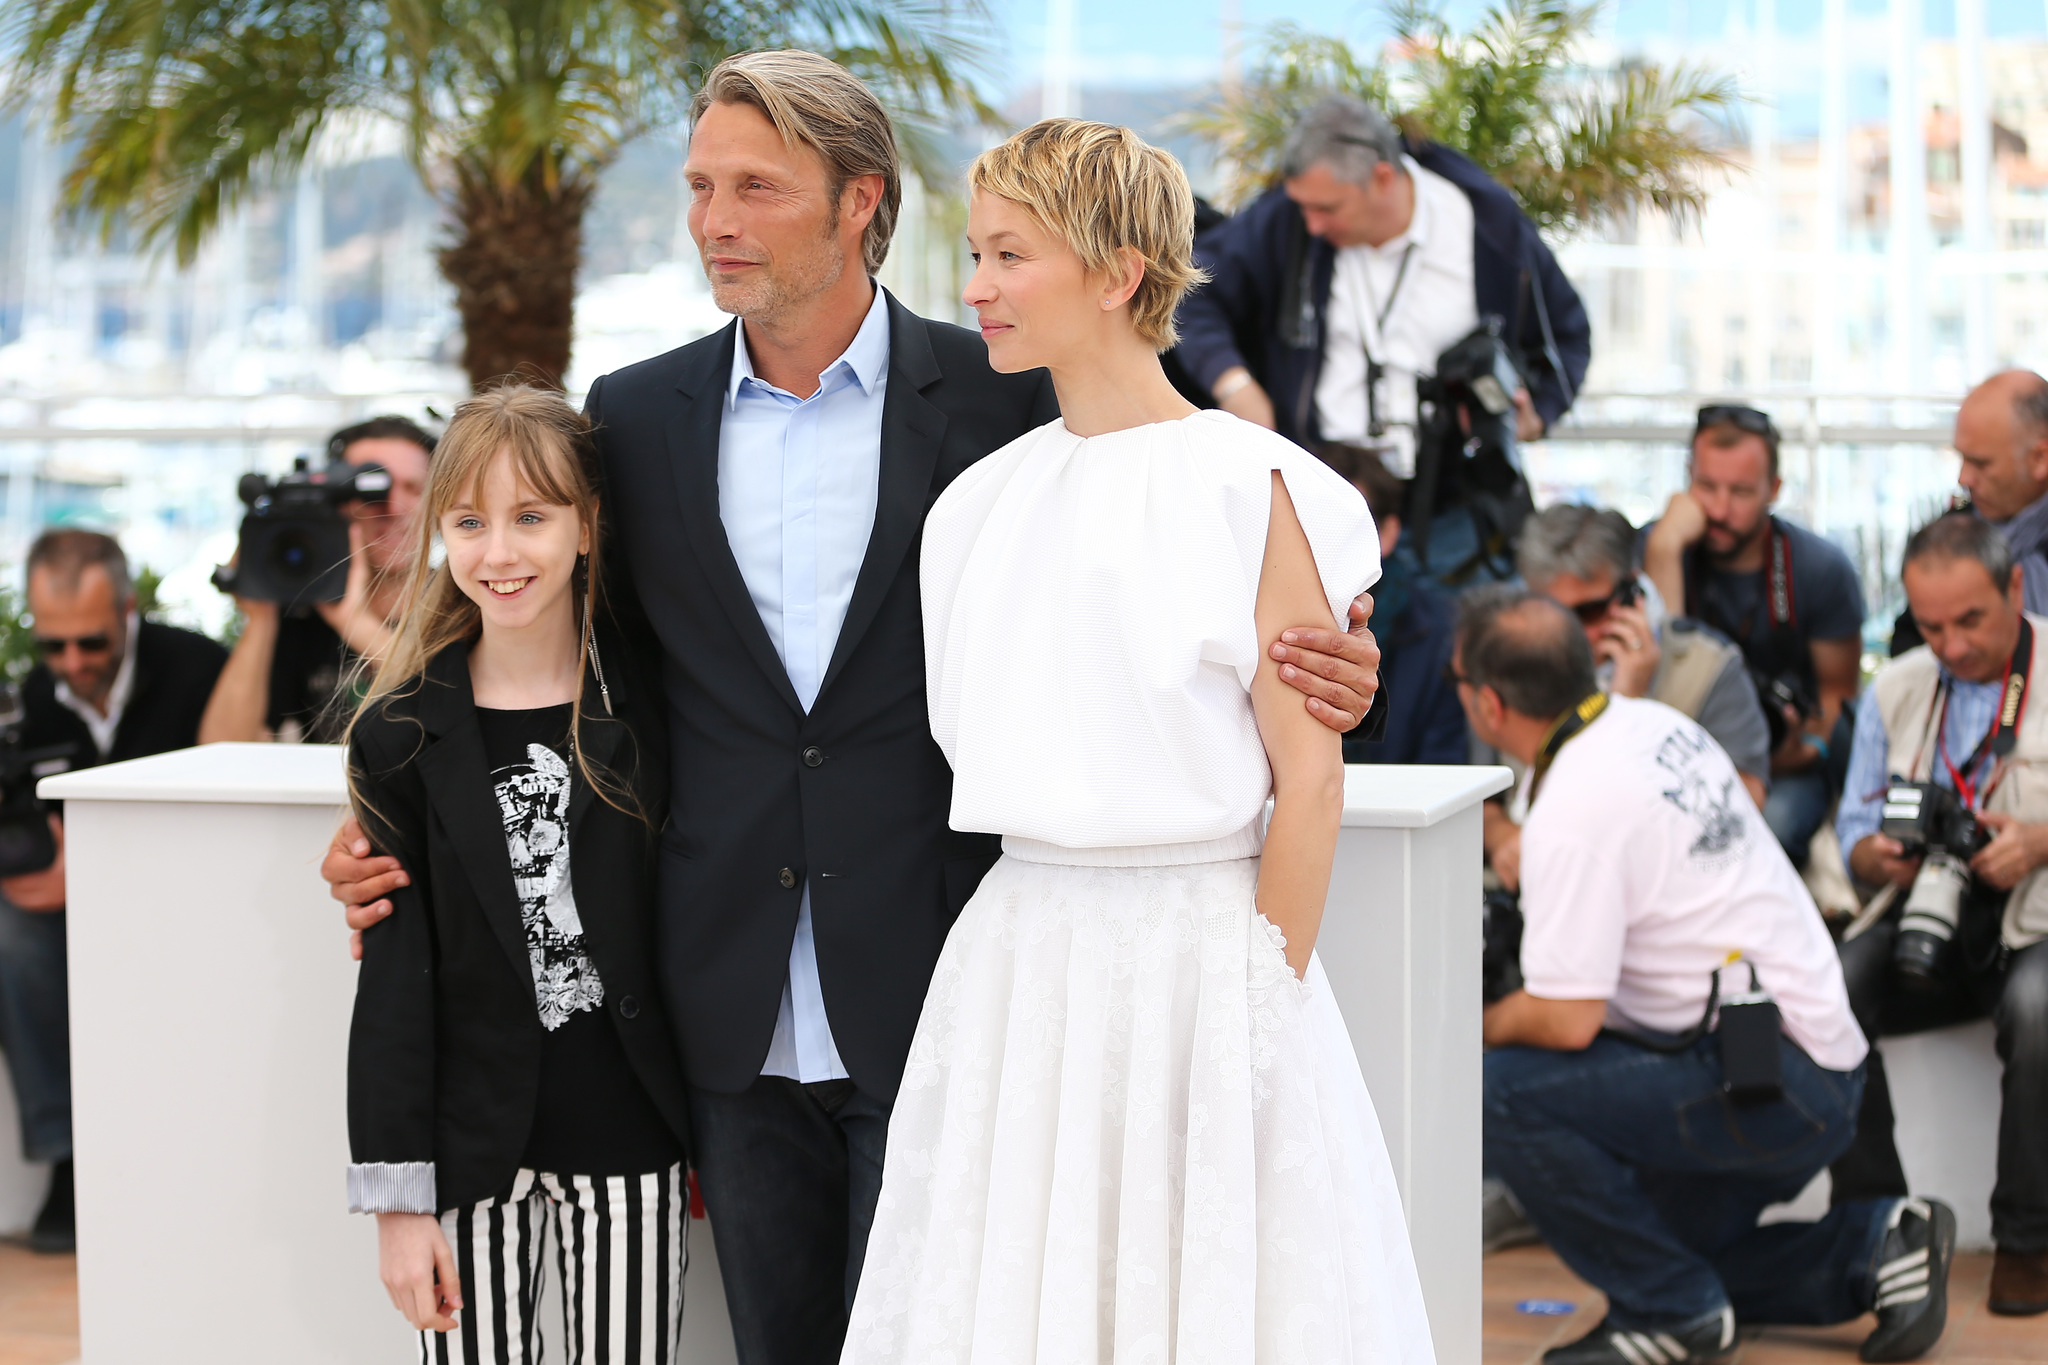 Delphine Chuillot, Mads Mikkelsen and Mélusine Mayance at event of Michael Kohlhaas (2013)